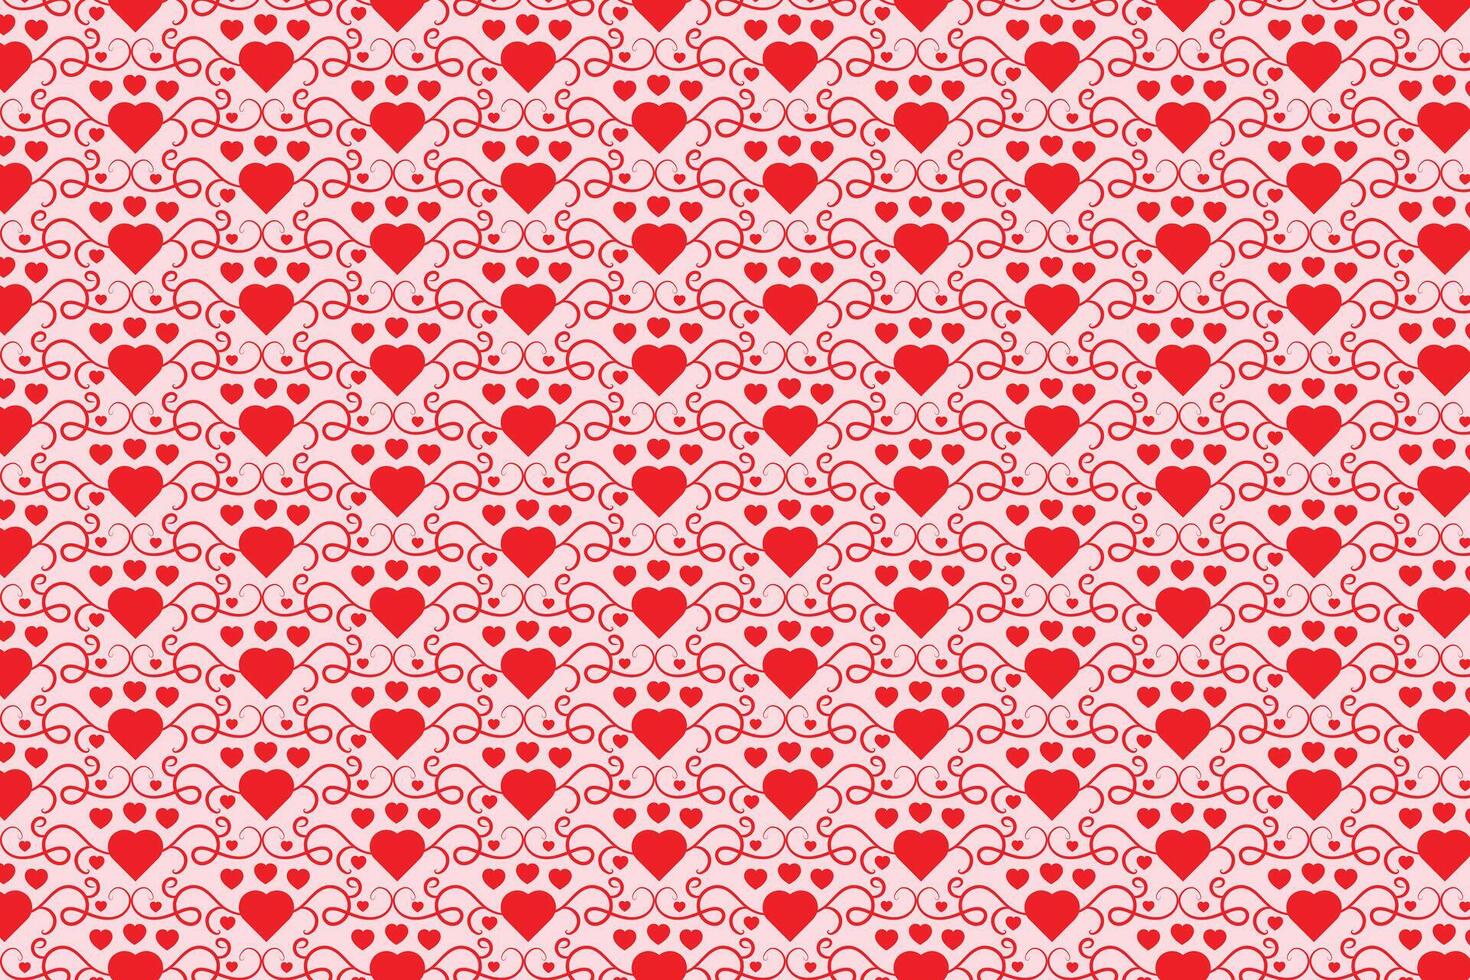 Red love romantic texture valentines day, abstract hearts Swirls pattern, curly heart repeating background, Flourishes Swirling romance seamless wrapping paper, lovely Elegant Digital fabric vector